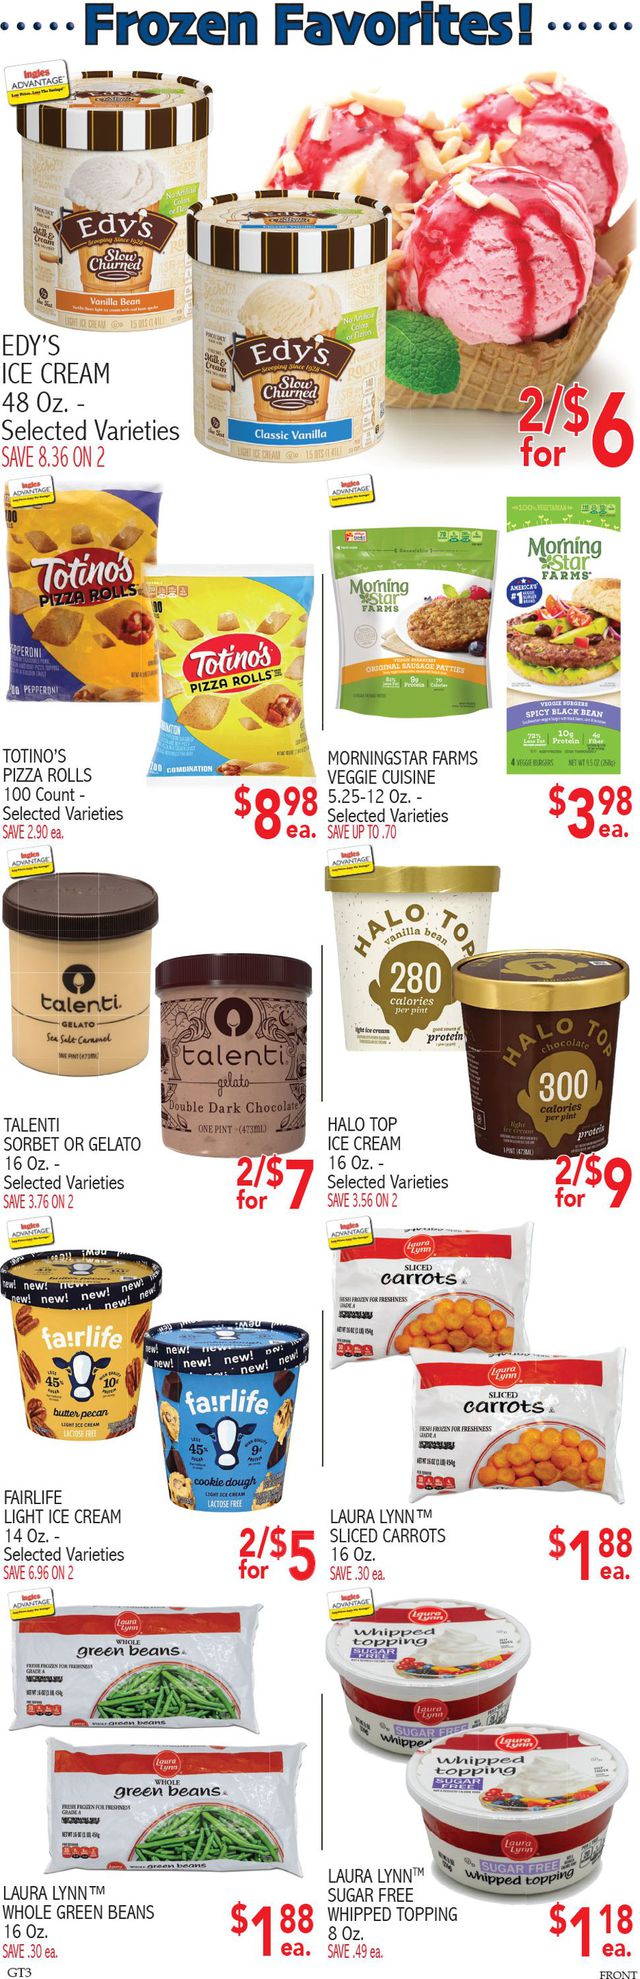 Ingles Ad from 07/20/2022